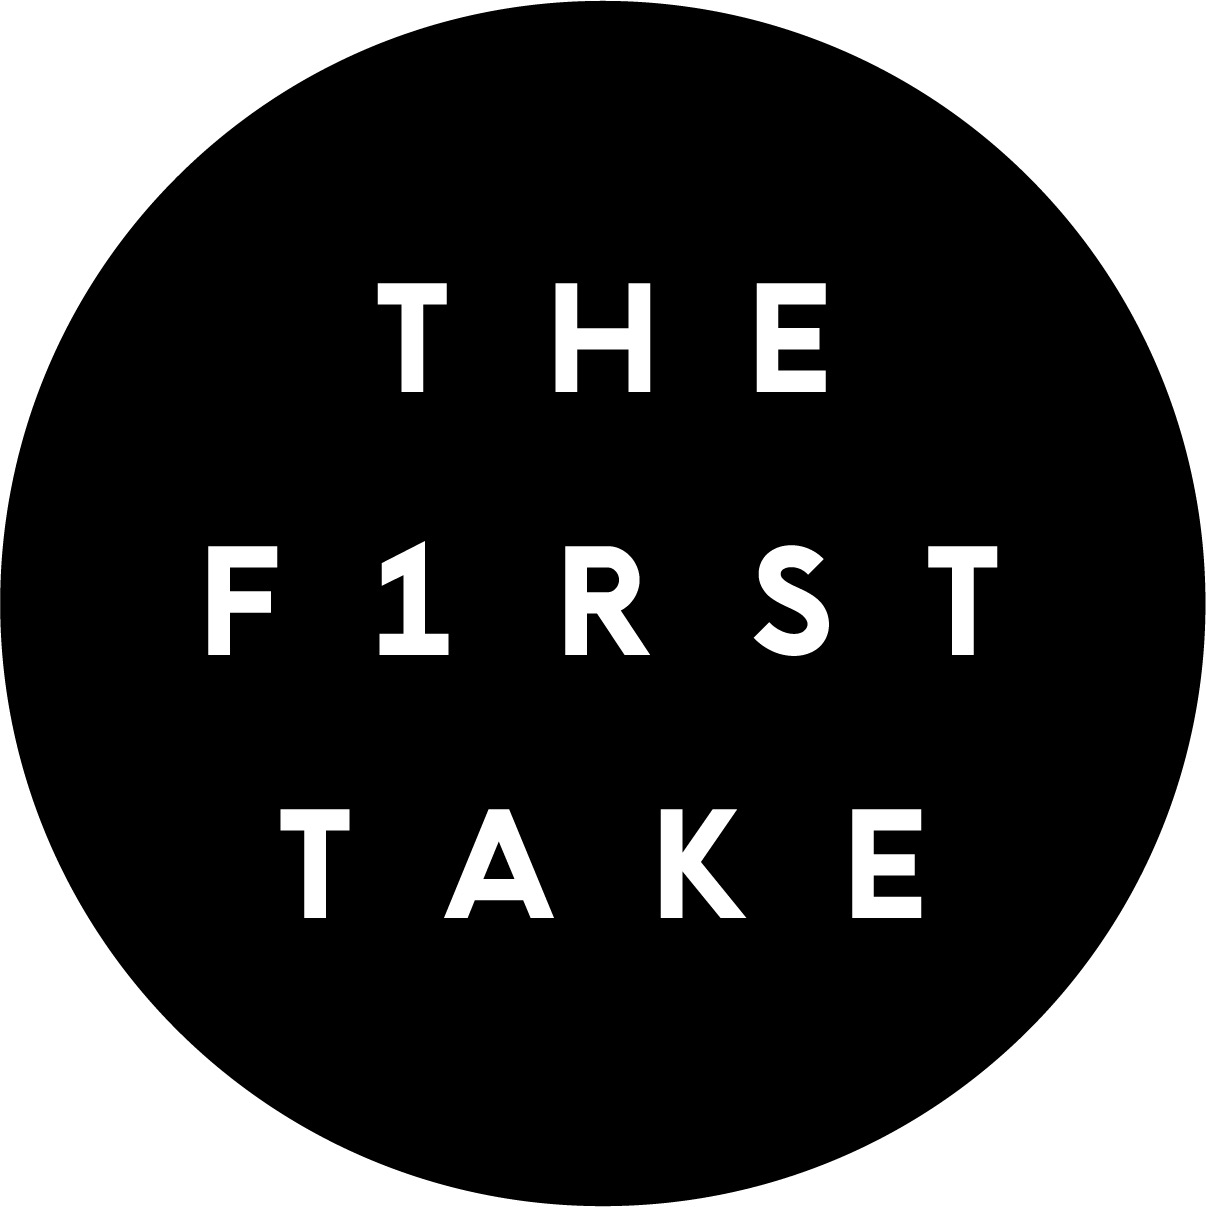 TOOBOE、『THE FIRST TAKE』に初登場！ メジャーデビュー曲「心臓」を一発撮りパフォーマンス - 画像一覧（1/2）